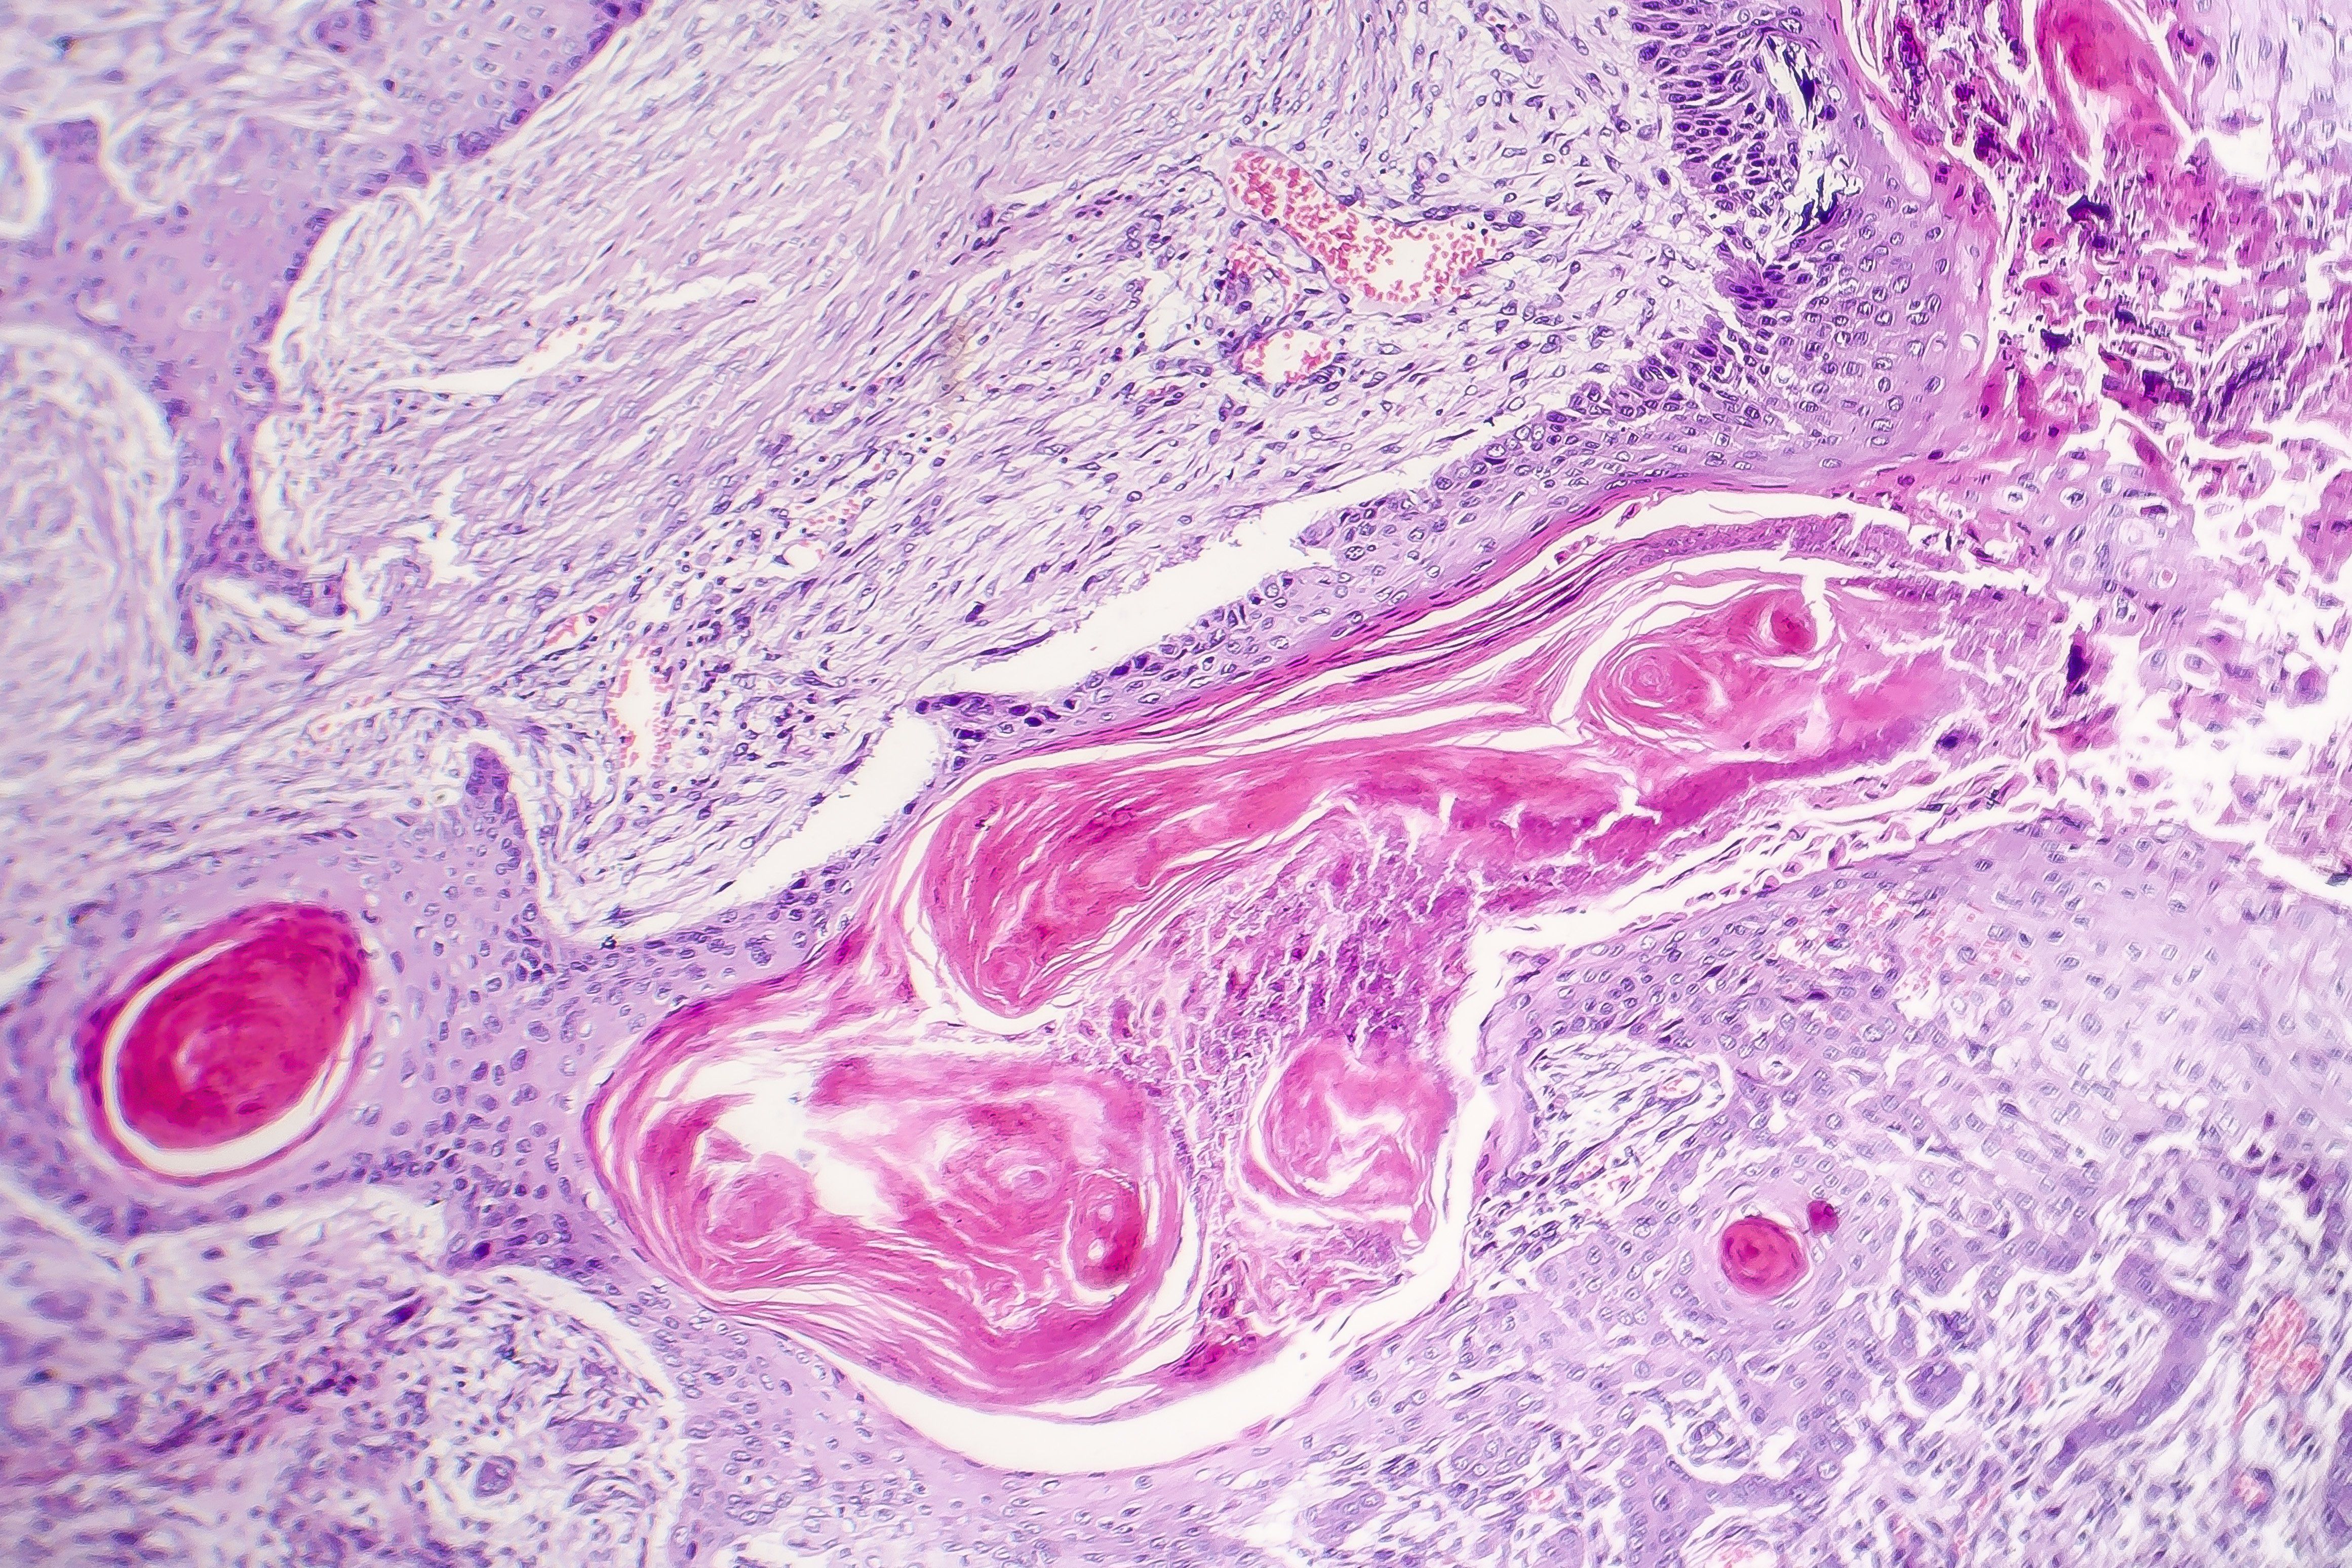 Invasive Squamous Cell Carcinoma Skin Cancer